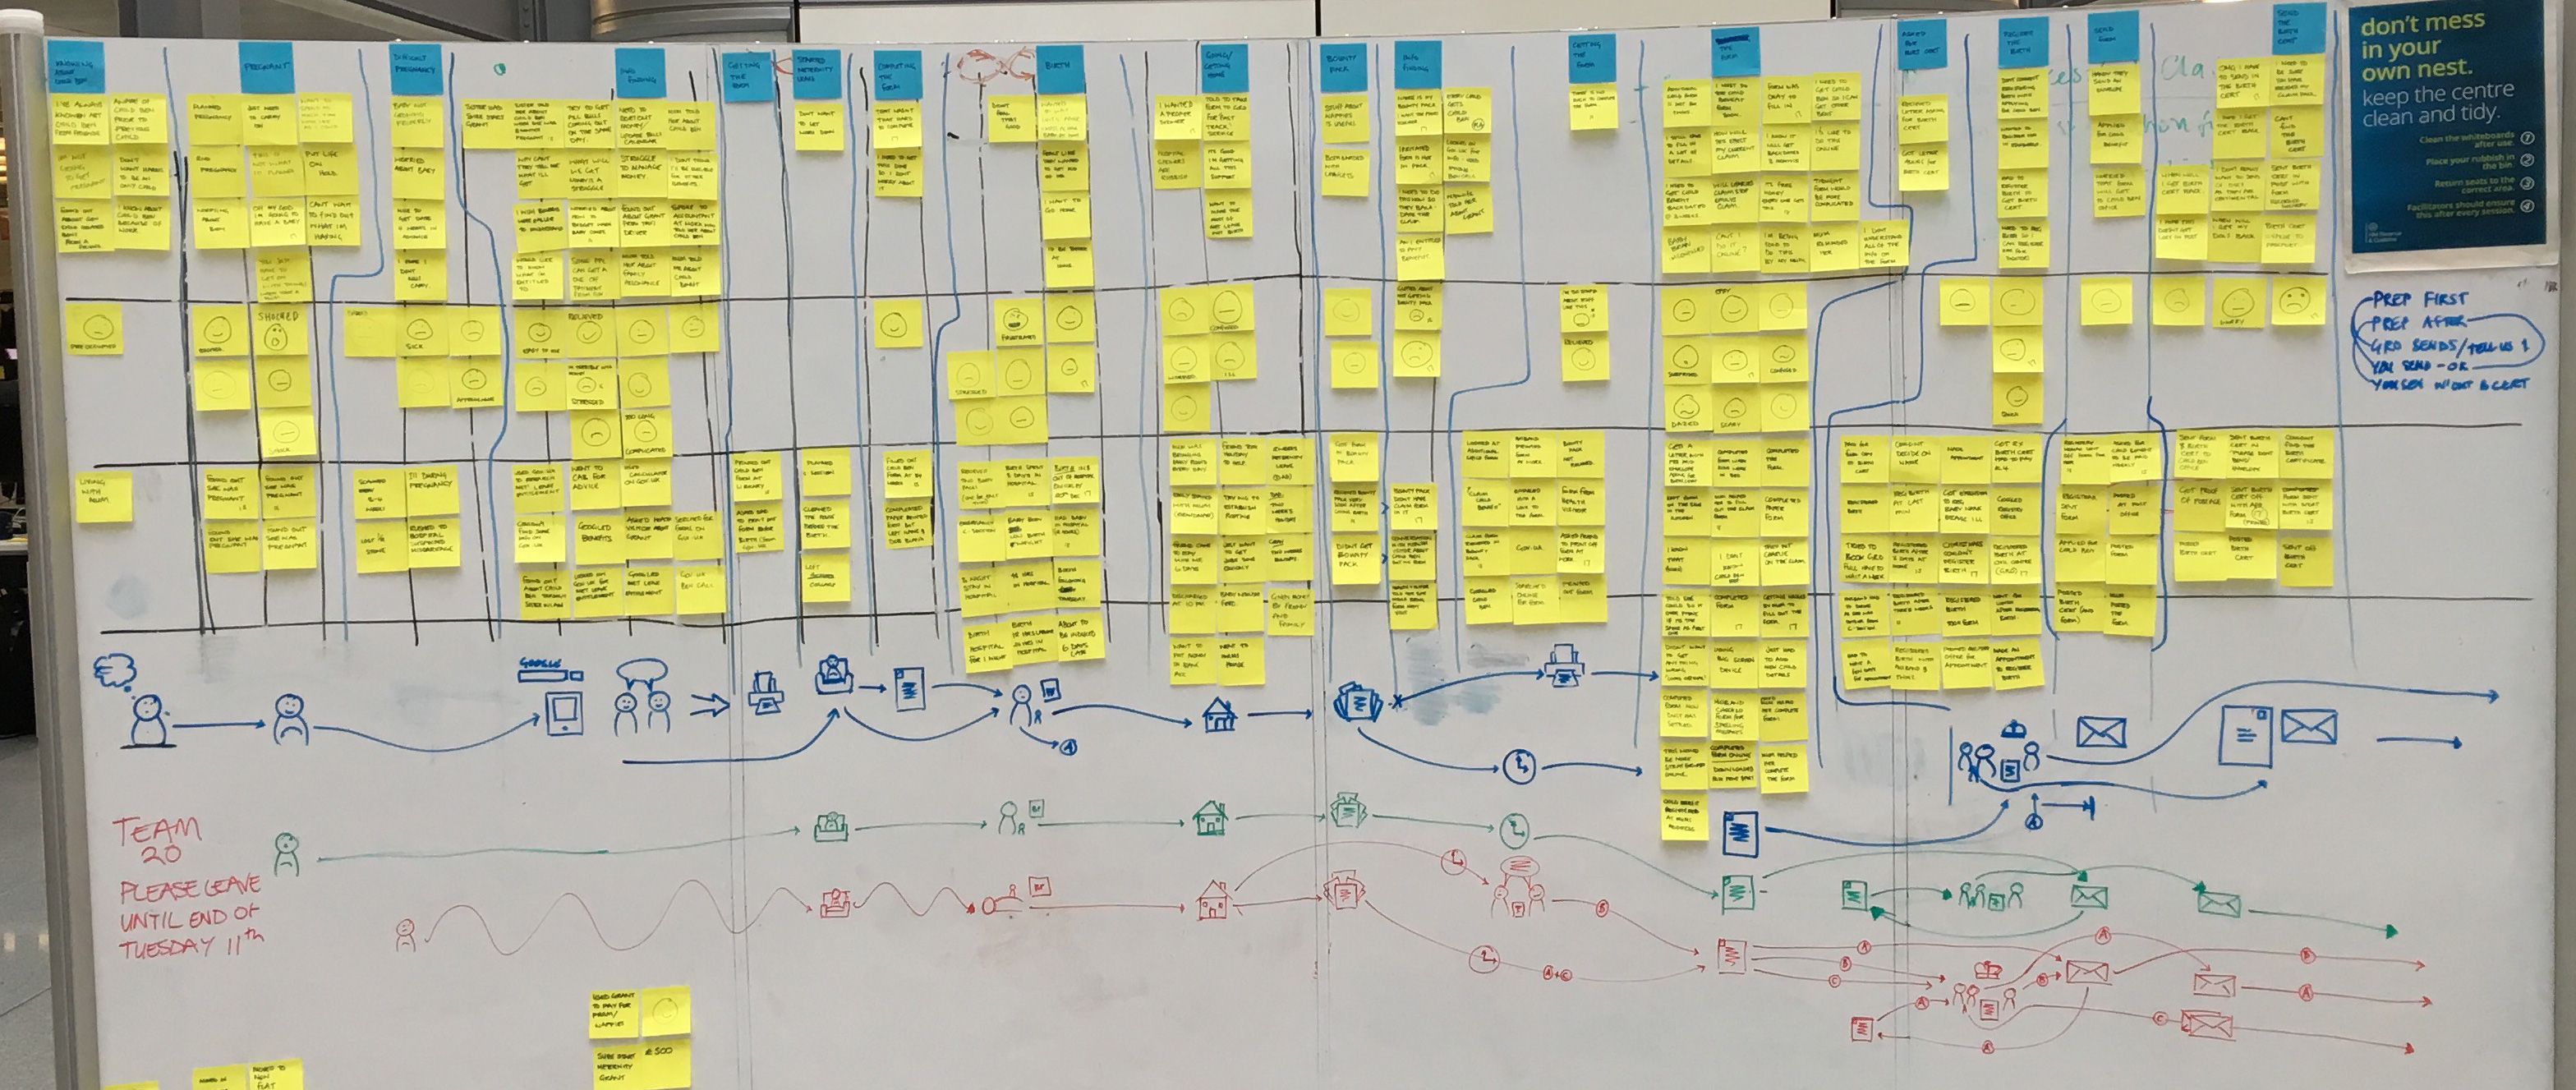 A photo of the service map made using post-it notes and a whiteboard